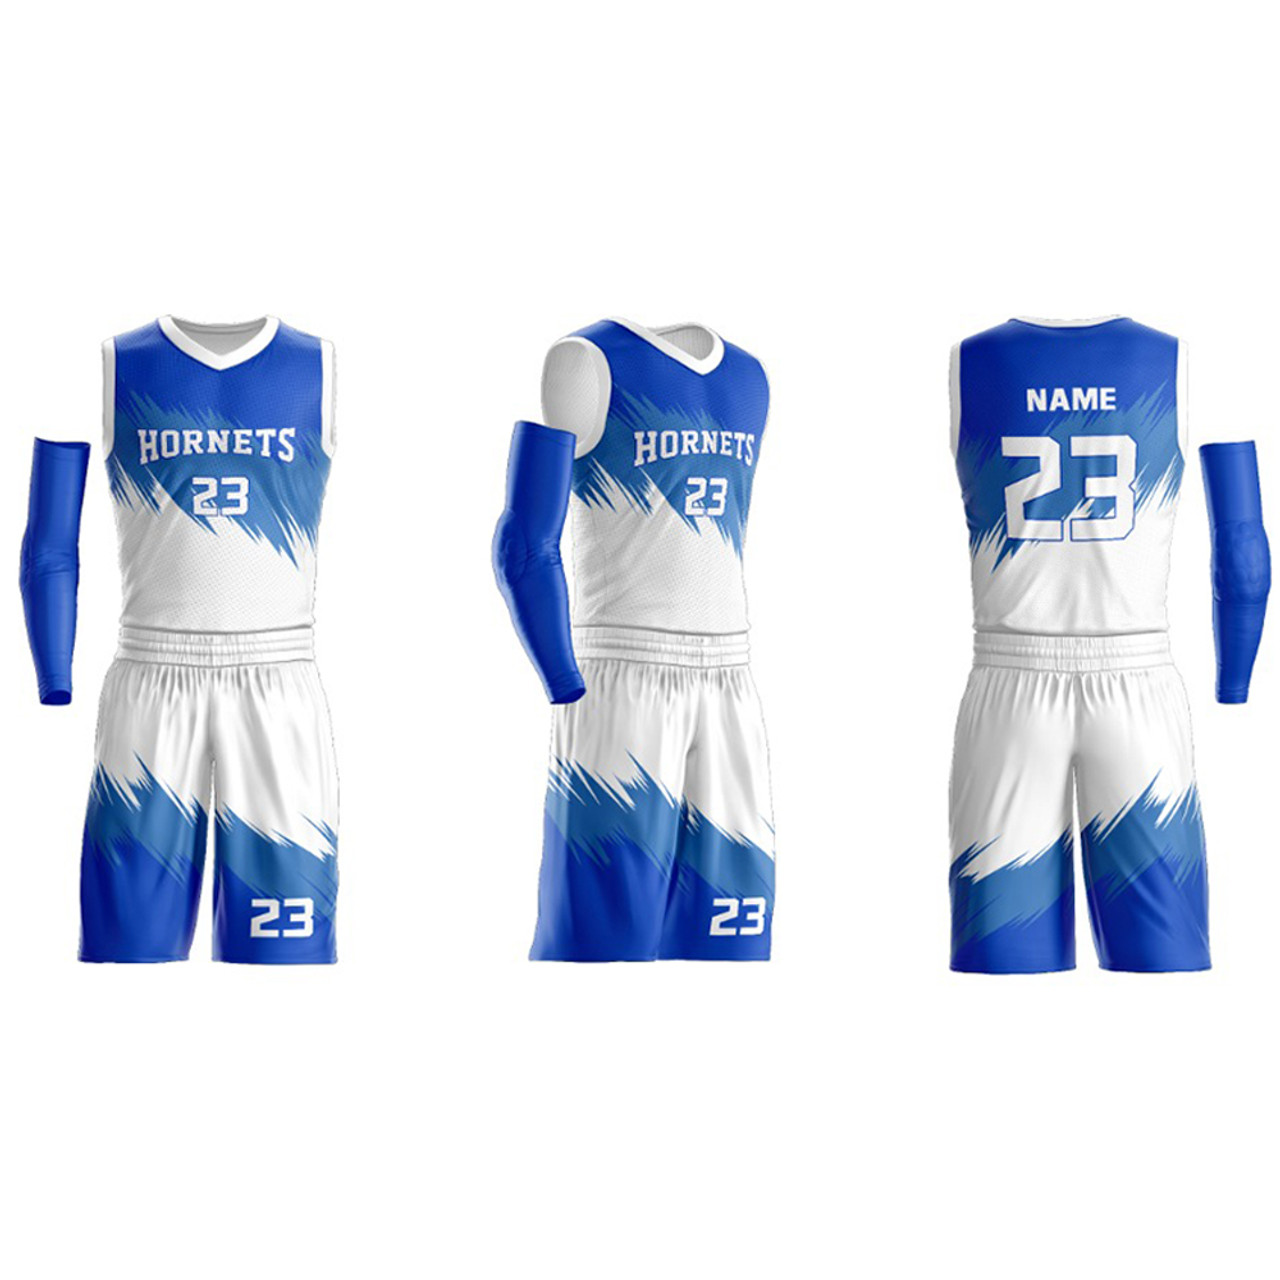 custom team basketball jerseys instock unifroms print with name and ...